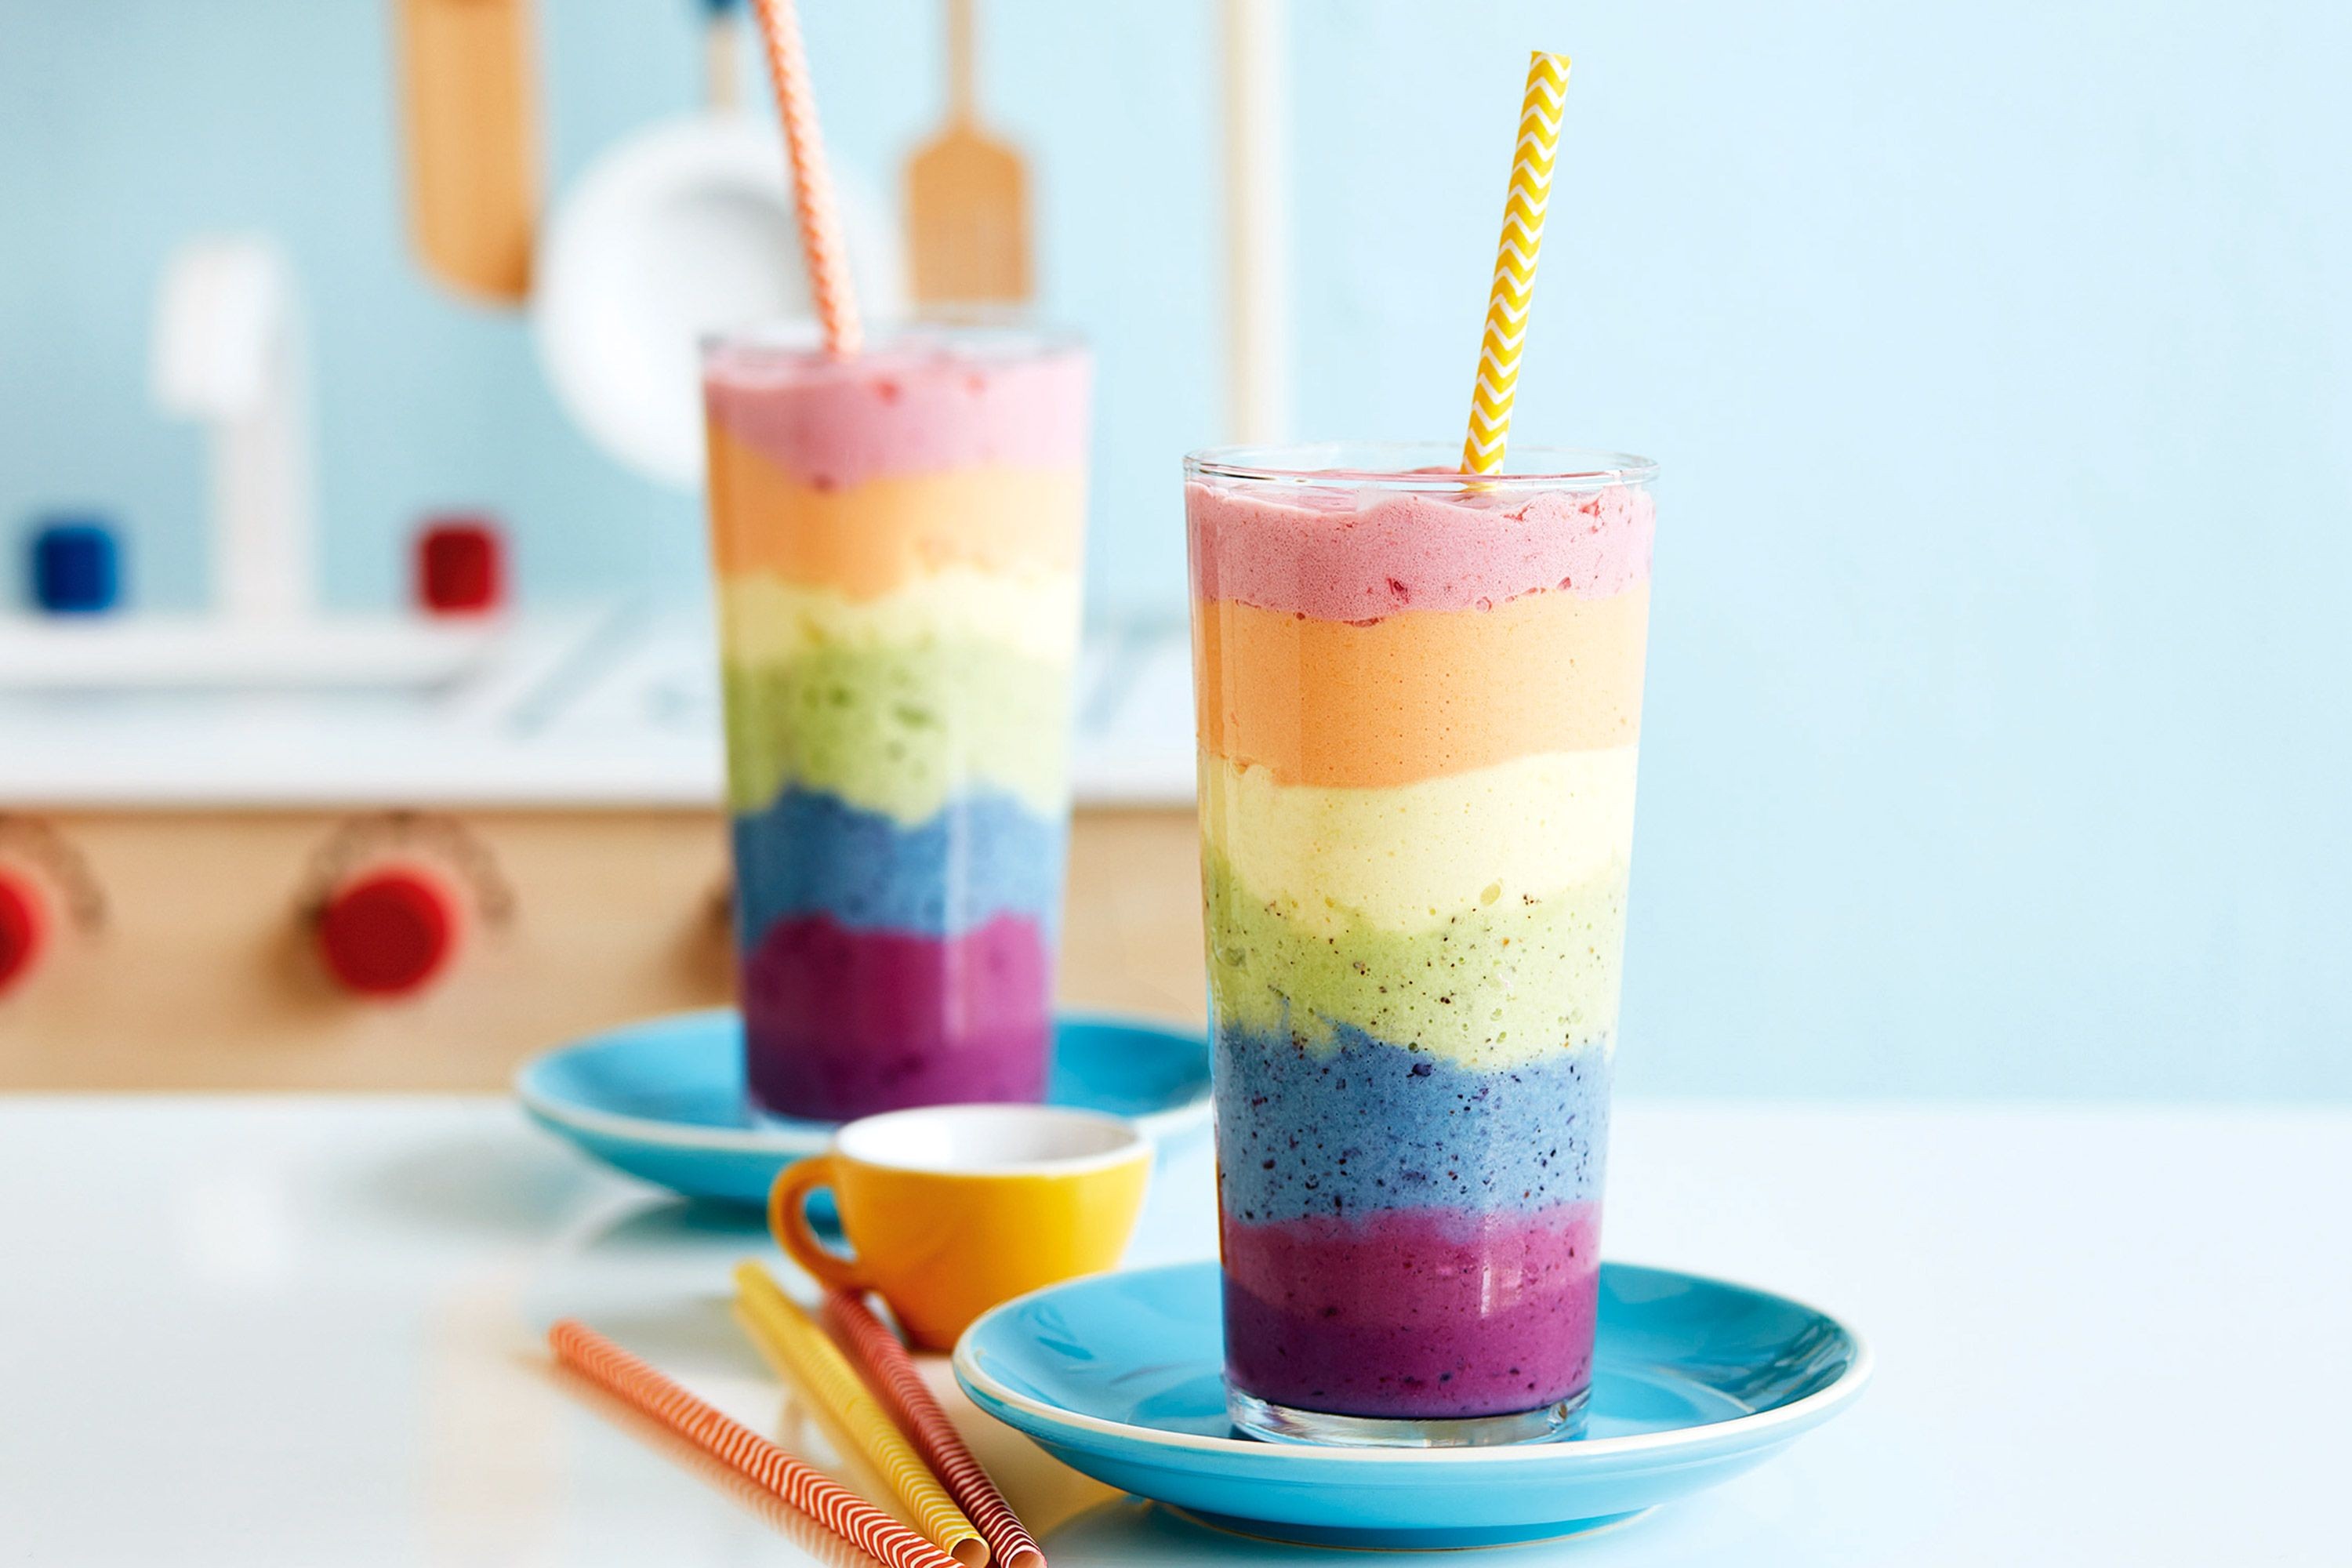 Rainbow Smoothie - Smoothie Wallpaper Iphone , HD Wallpaper & Backgrounds